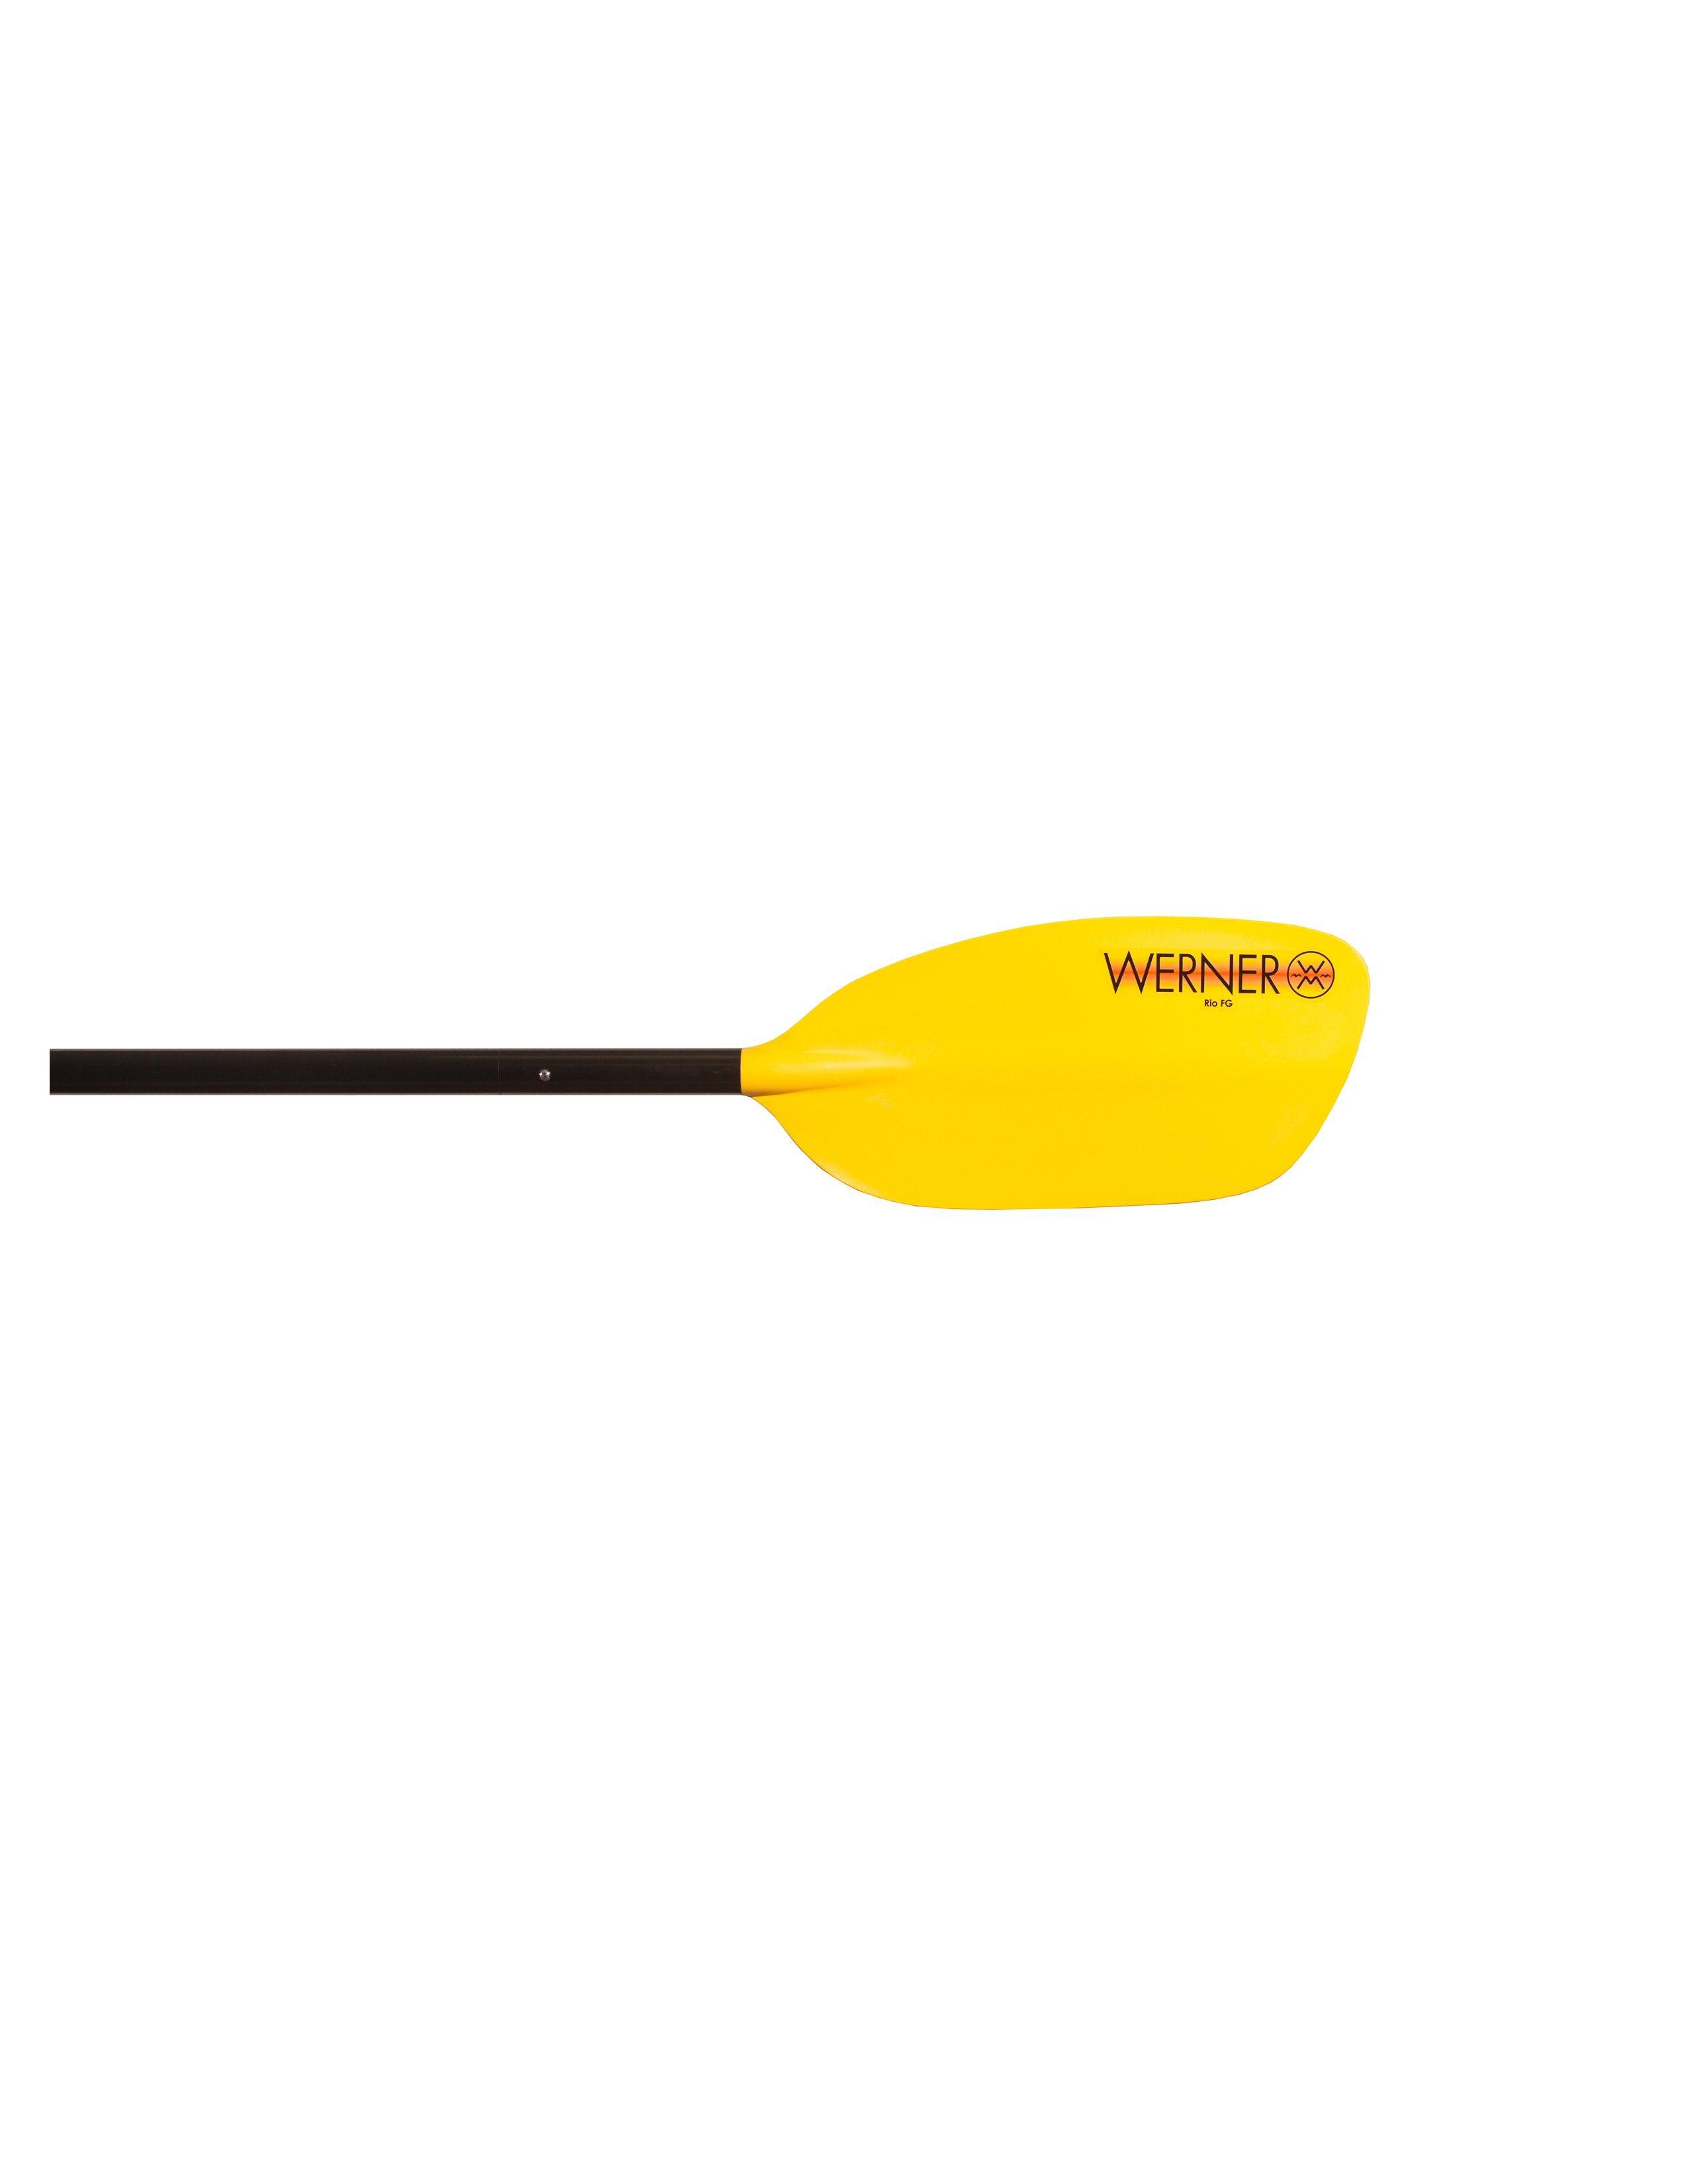 We Are Werner Logo - Werner Rio Small Shaft 1PC - New Whitewater Kayak Paddles ...